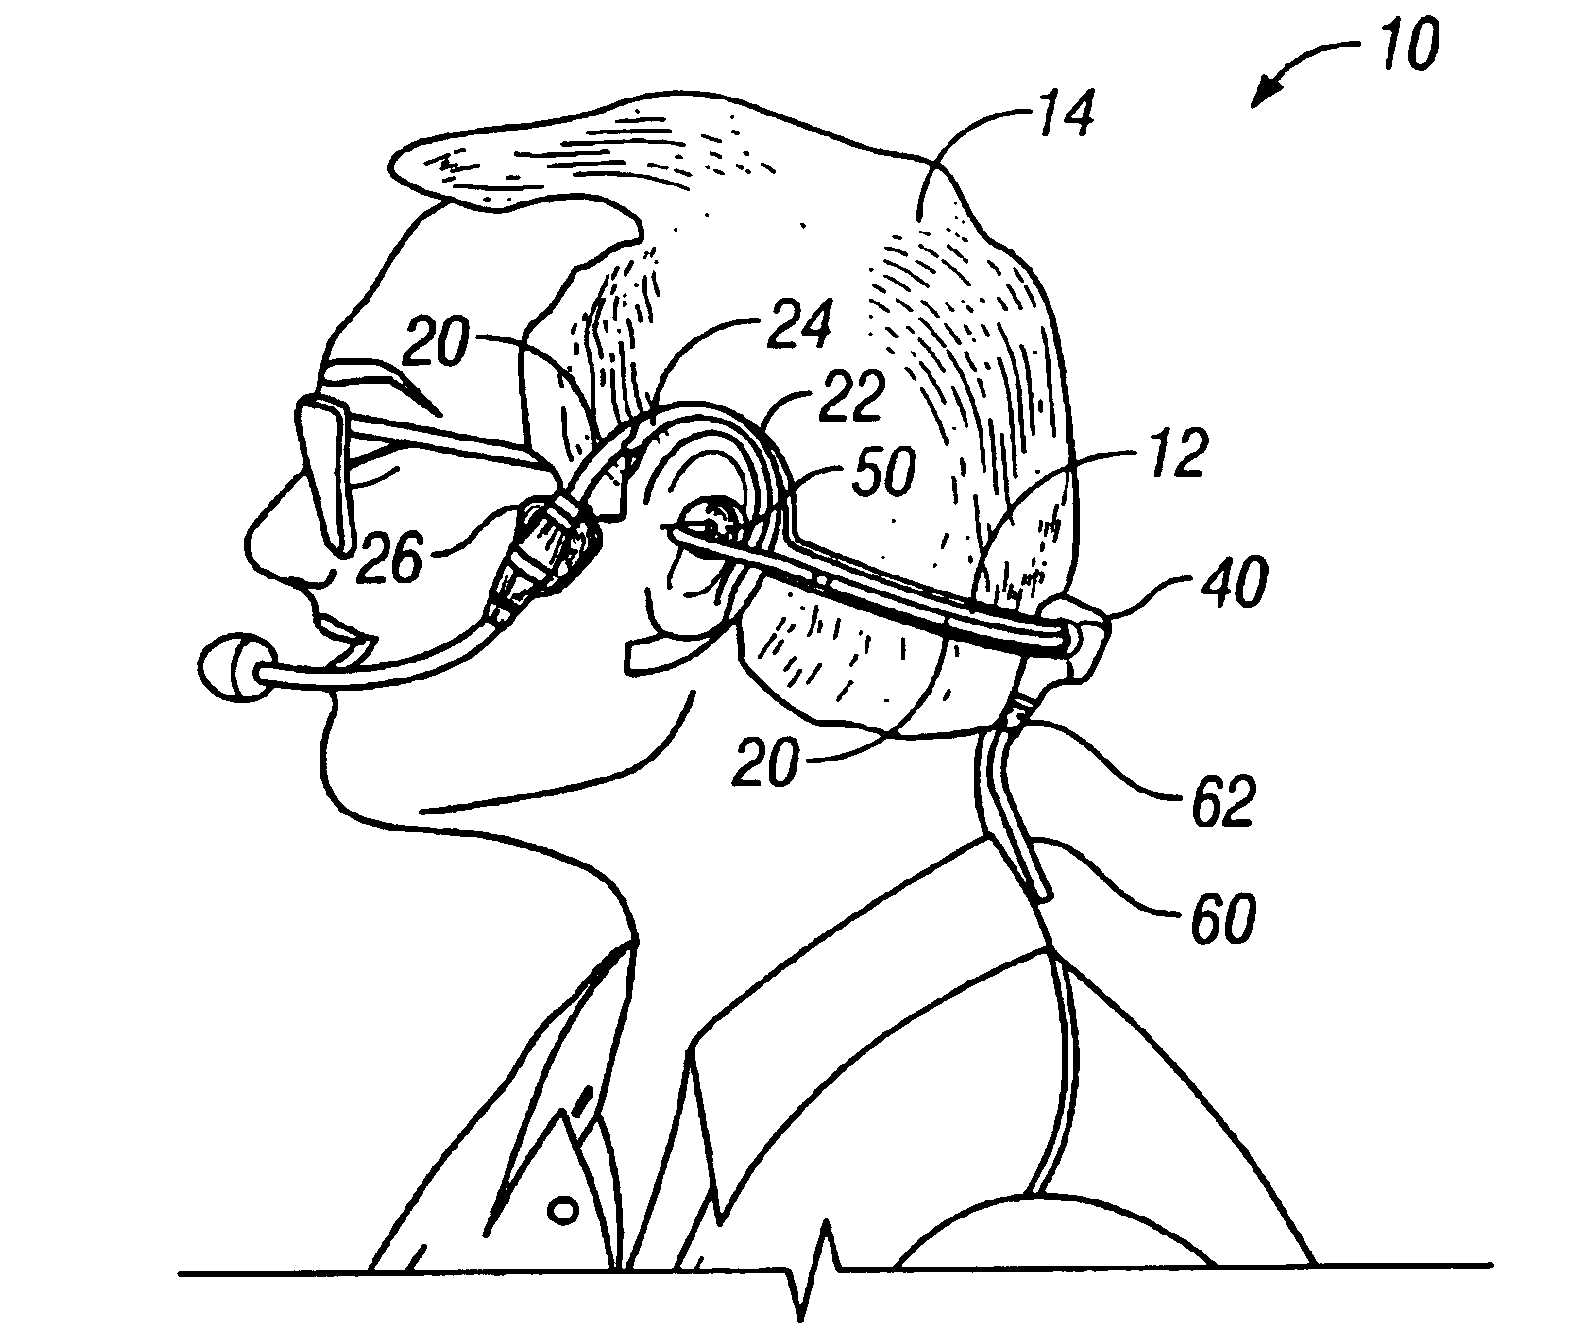 Lightweight headset for high noise environments